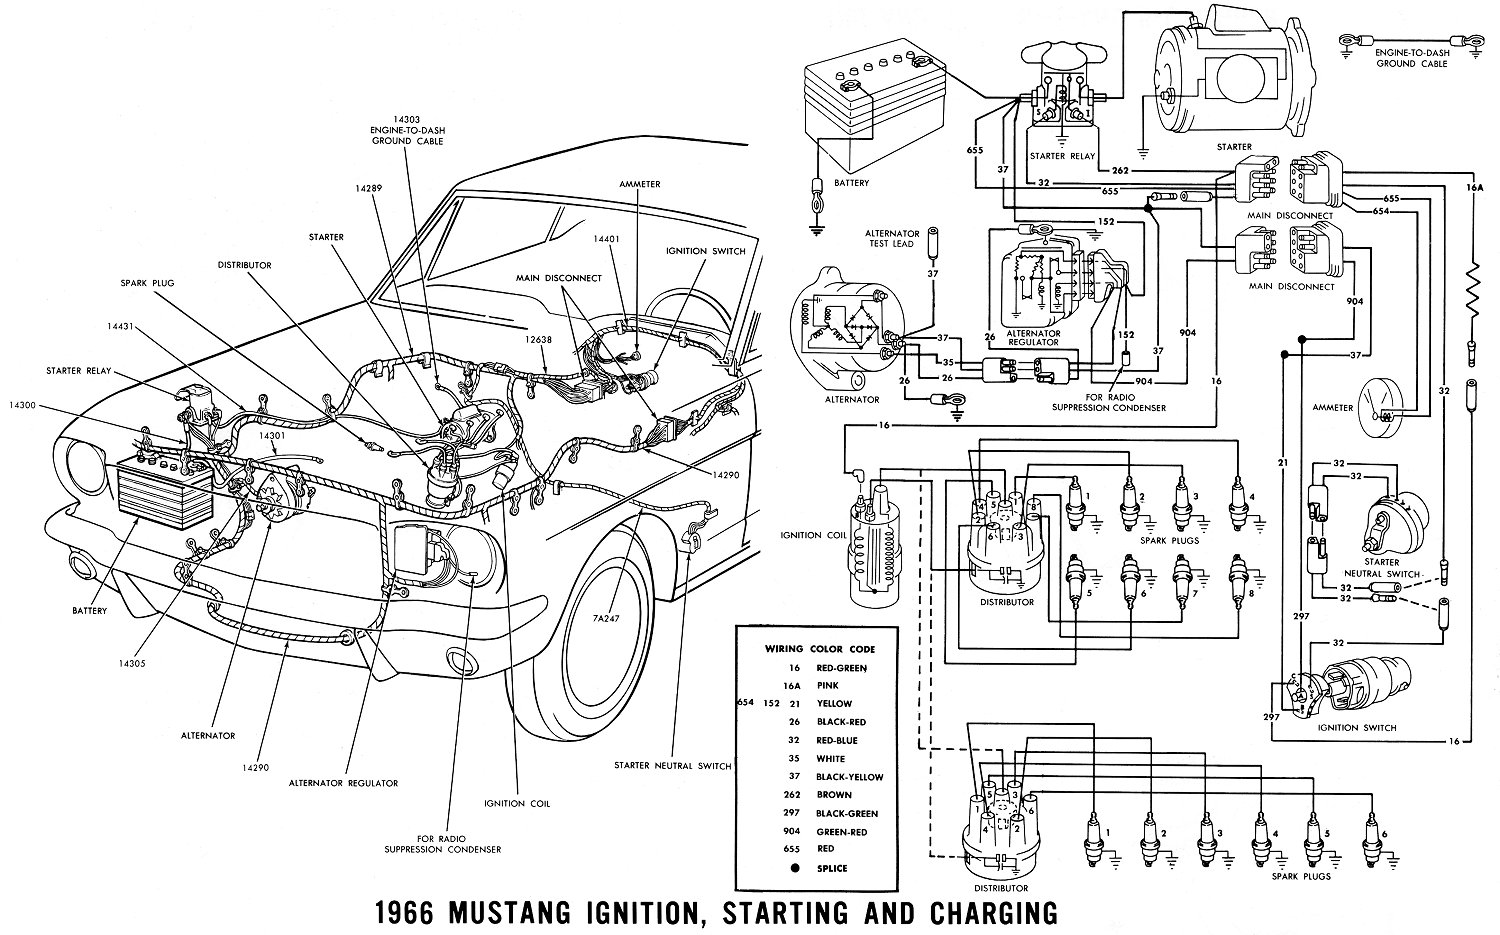 1965 Ford Mustang Wiring Diagram Pdf from jacobsonrs.tripod.com